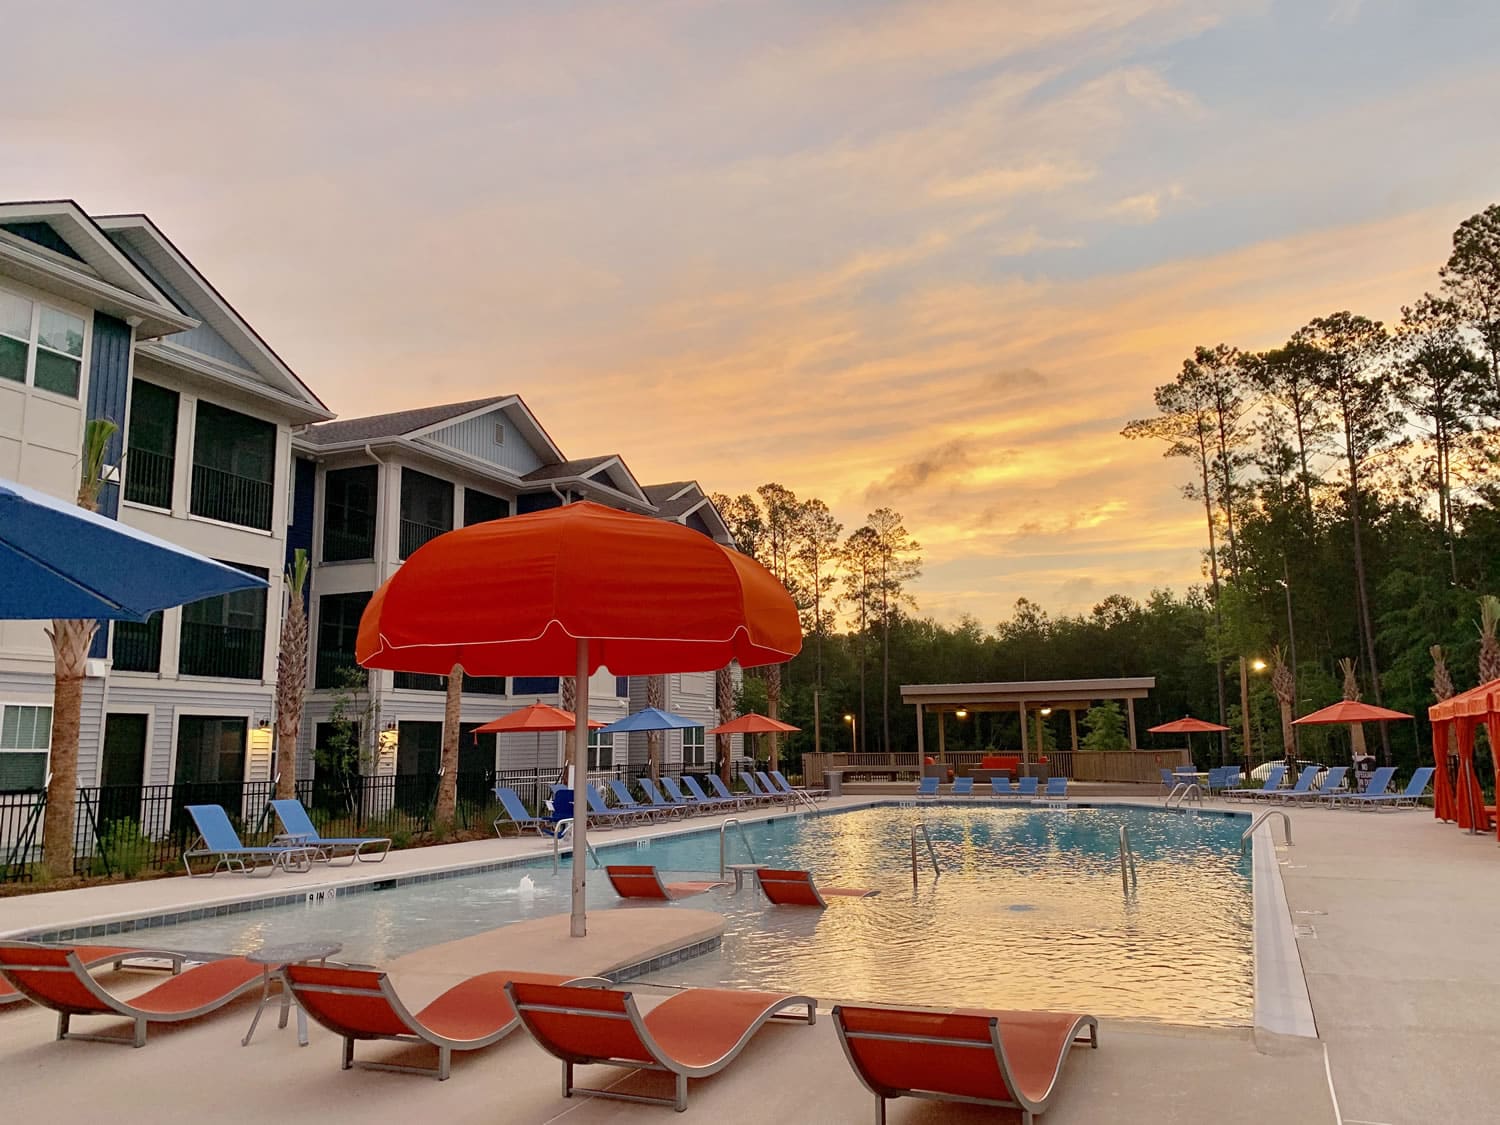 Discover the idyllic apartments in Bluffton, nestled between breathtaking landscapes, boasting a serene pool area complete with comfortable chairs and shady umbrellas.